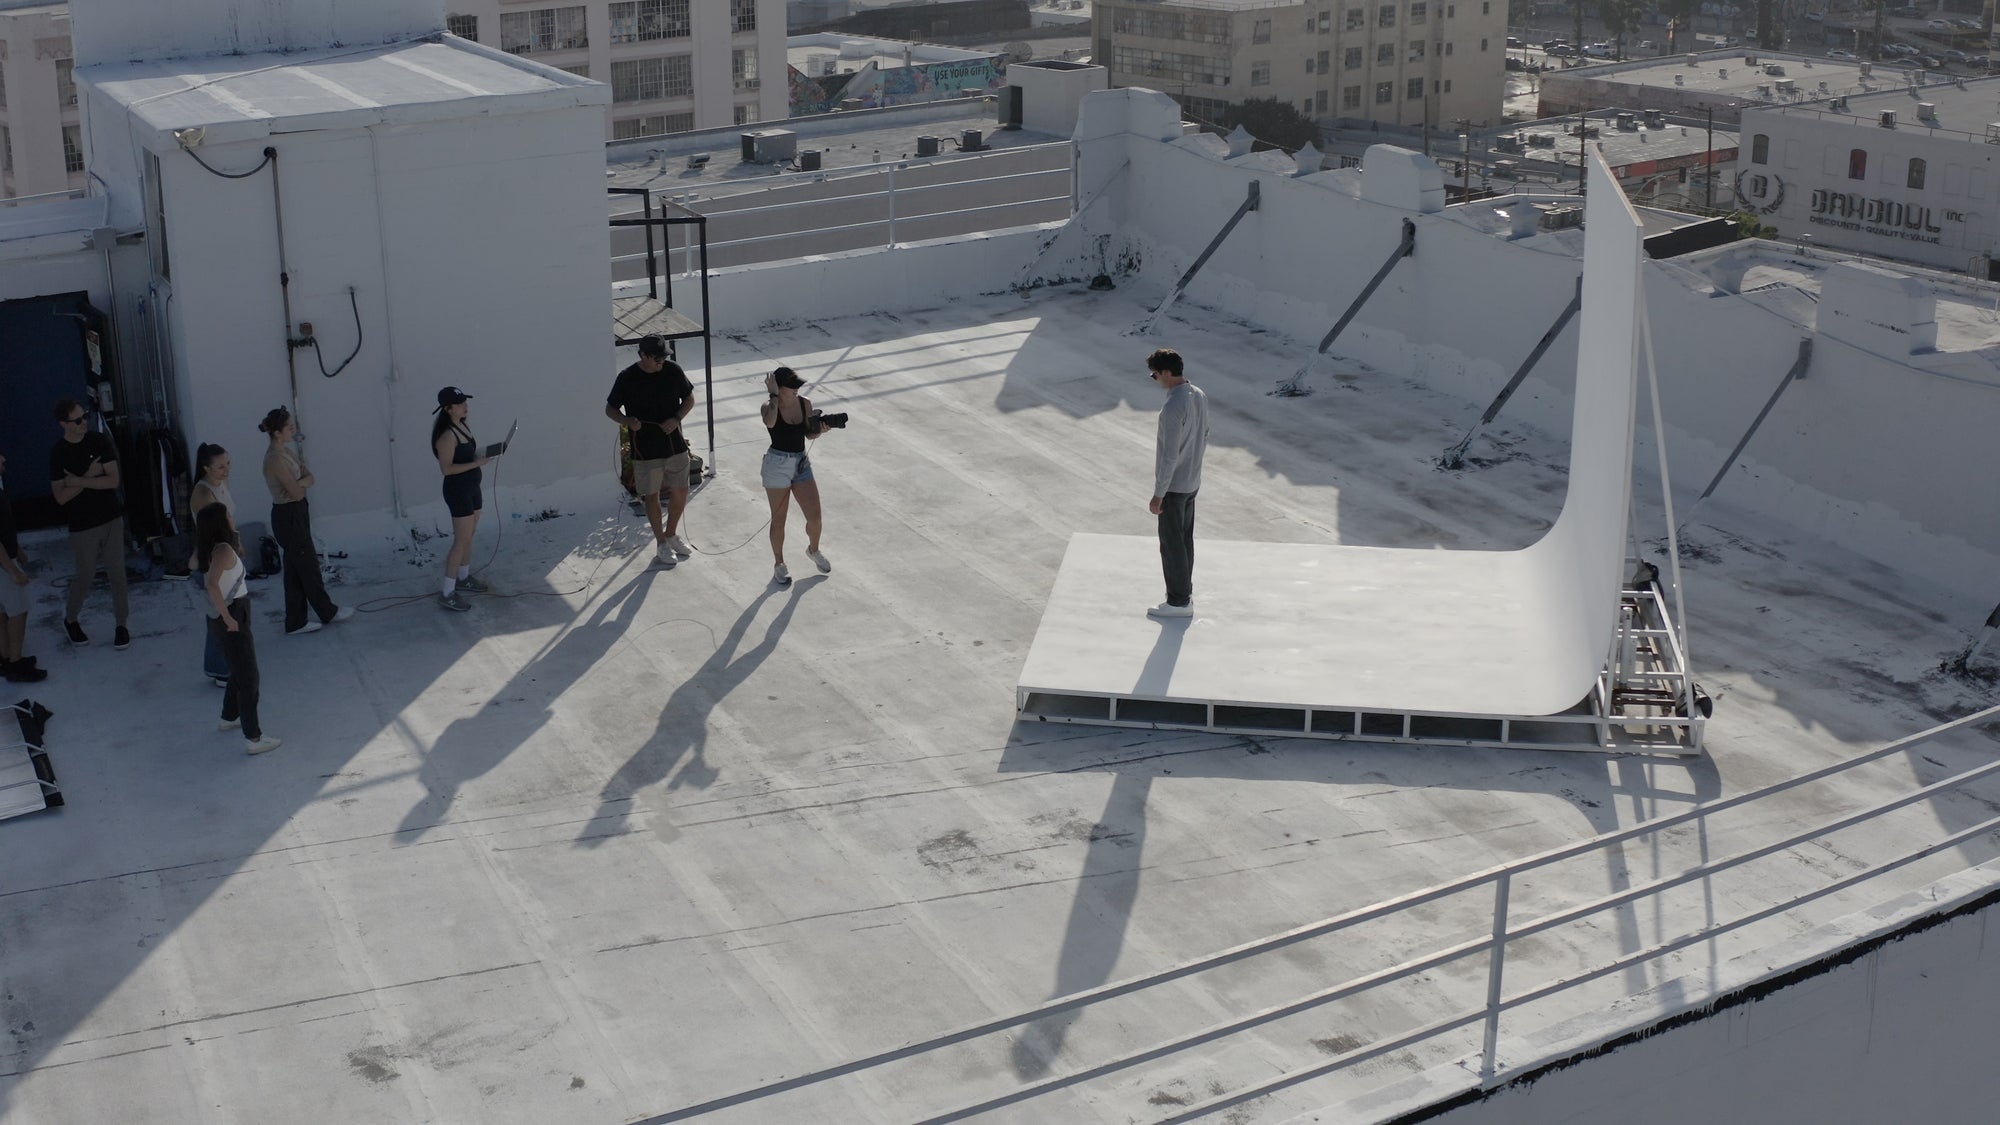 LOS ANGELES ROOFTOP WITH CYC APEX PHOTO STUDIOS ROOFTOP A Downtown Cyc cyclorama bts phooto video productions sunset